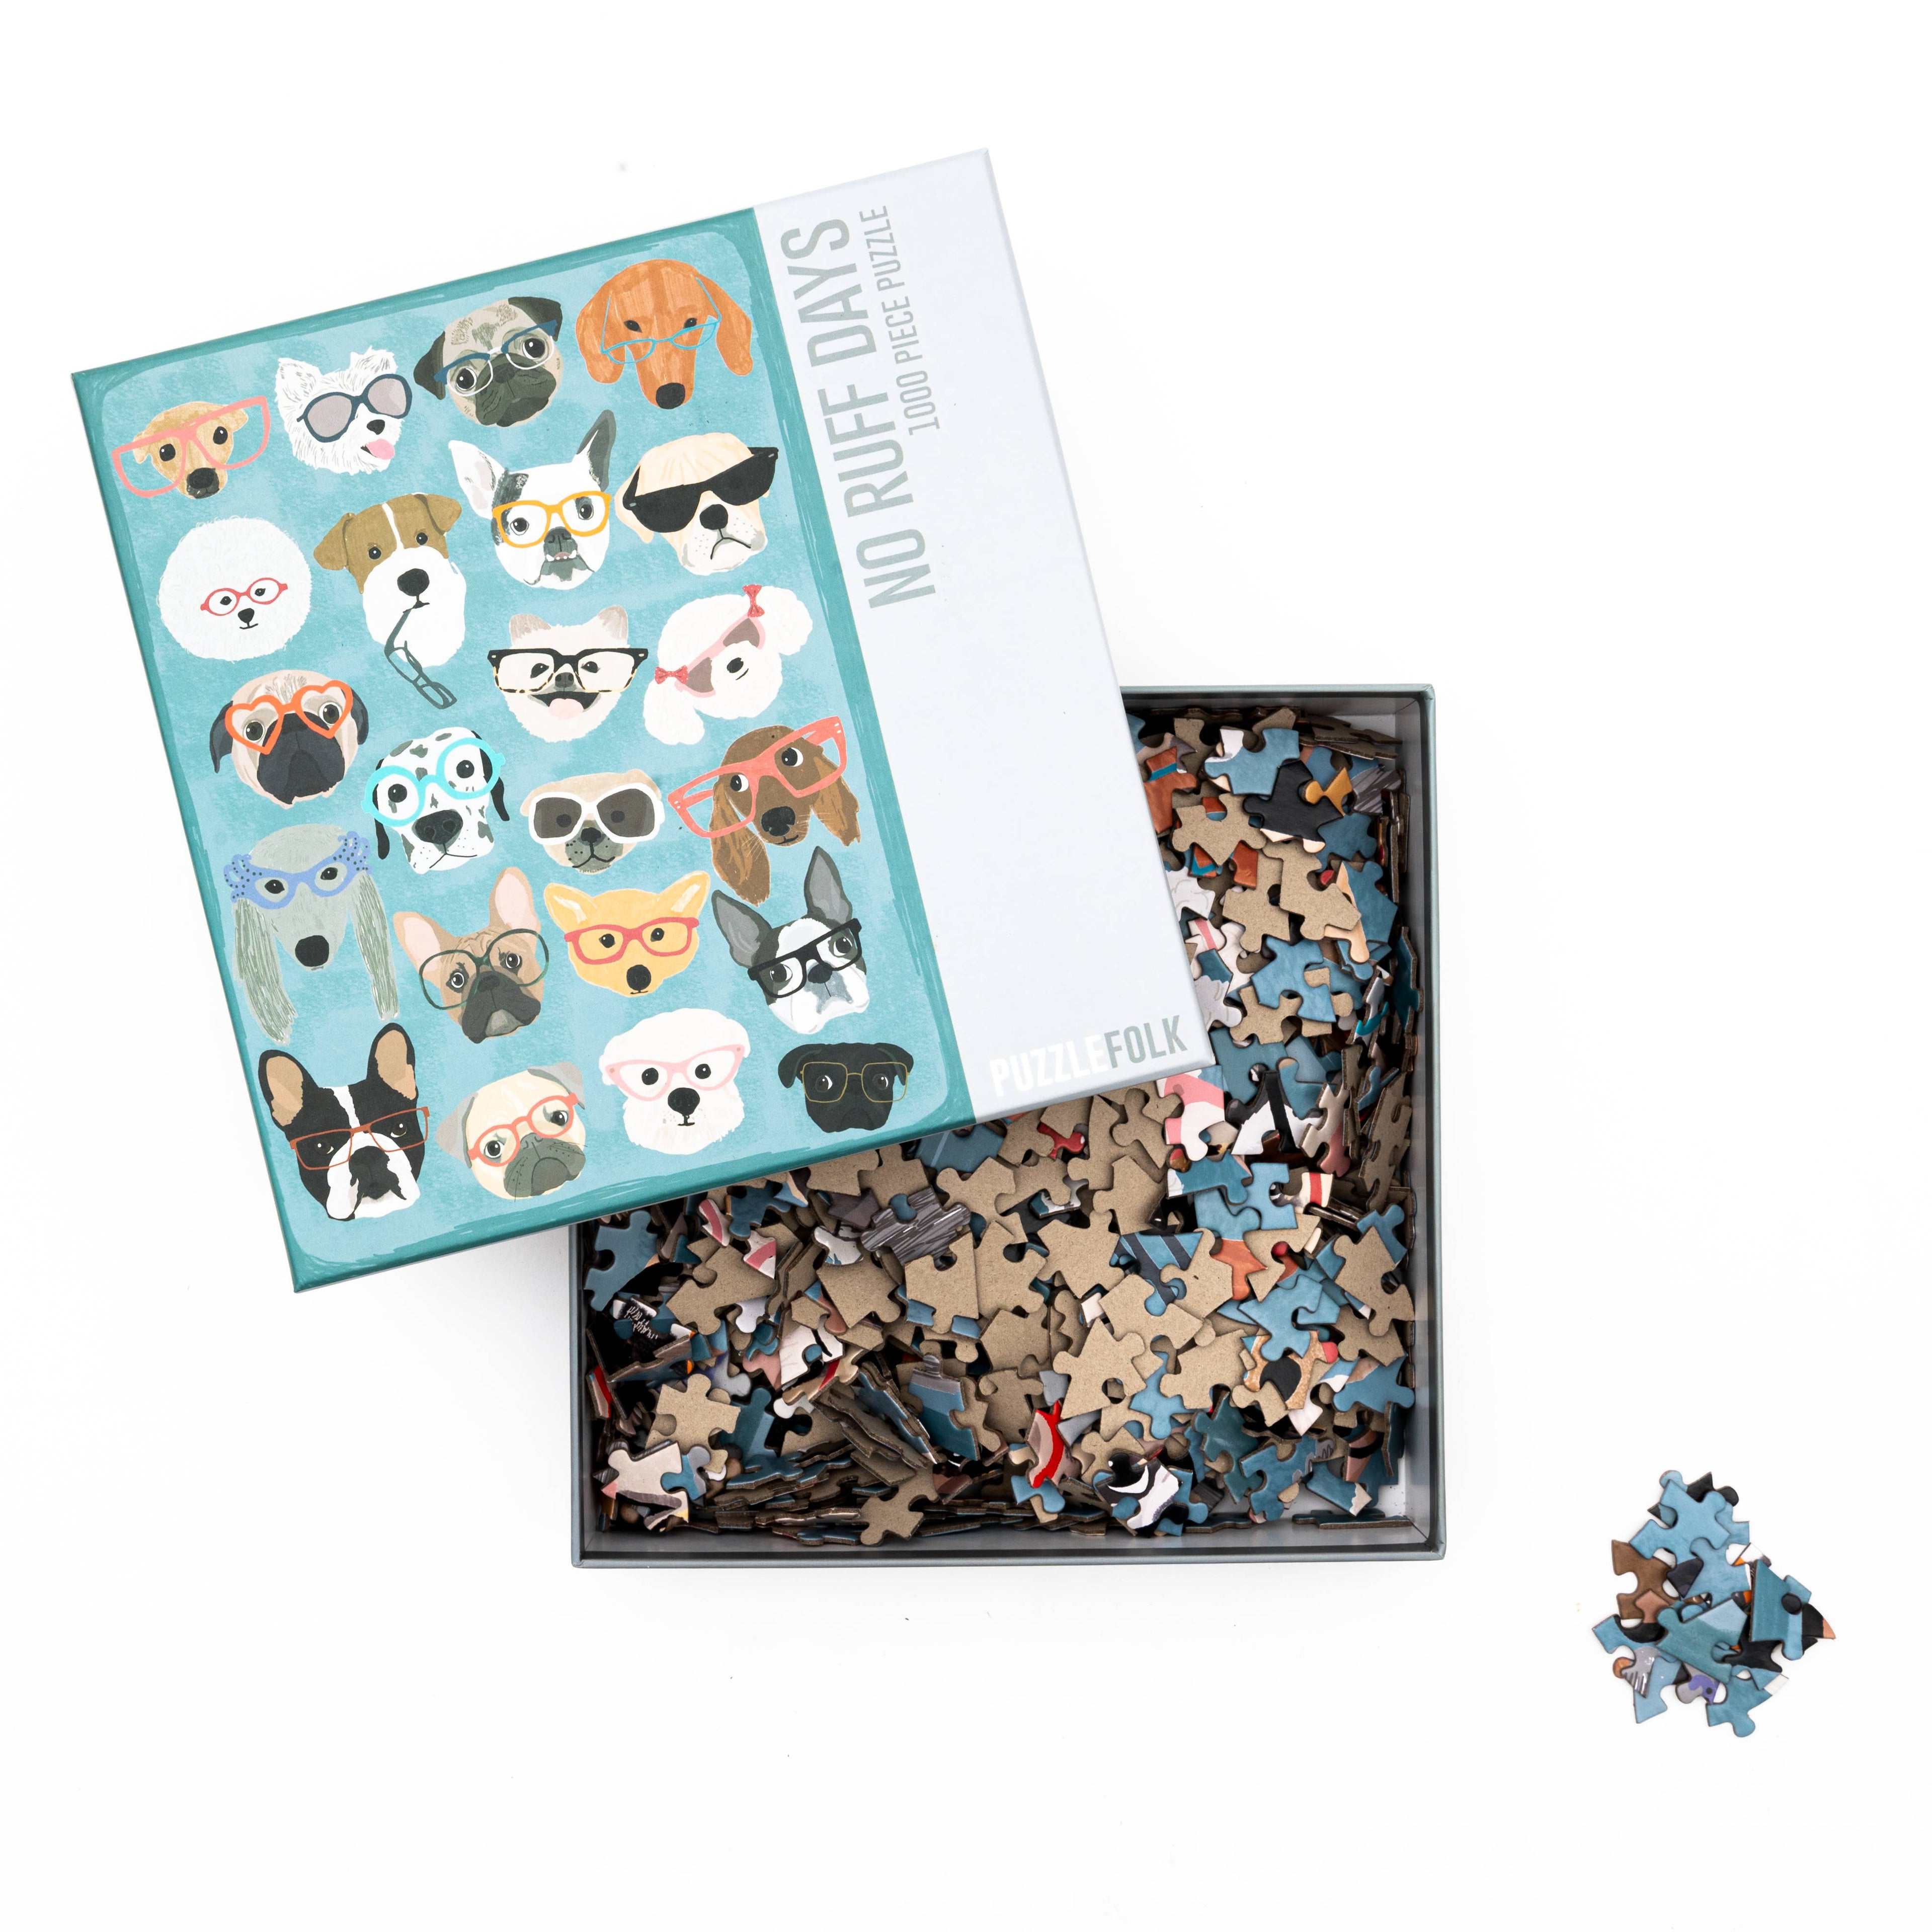 No Ruff Days Dogs 1000 Piece Puzzle by Hanna Melin